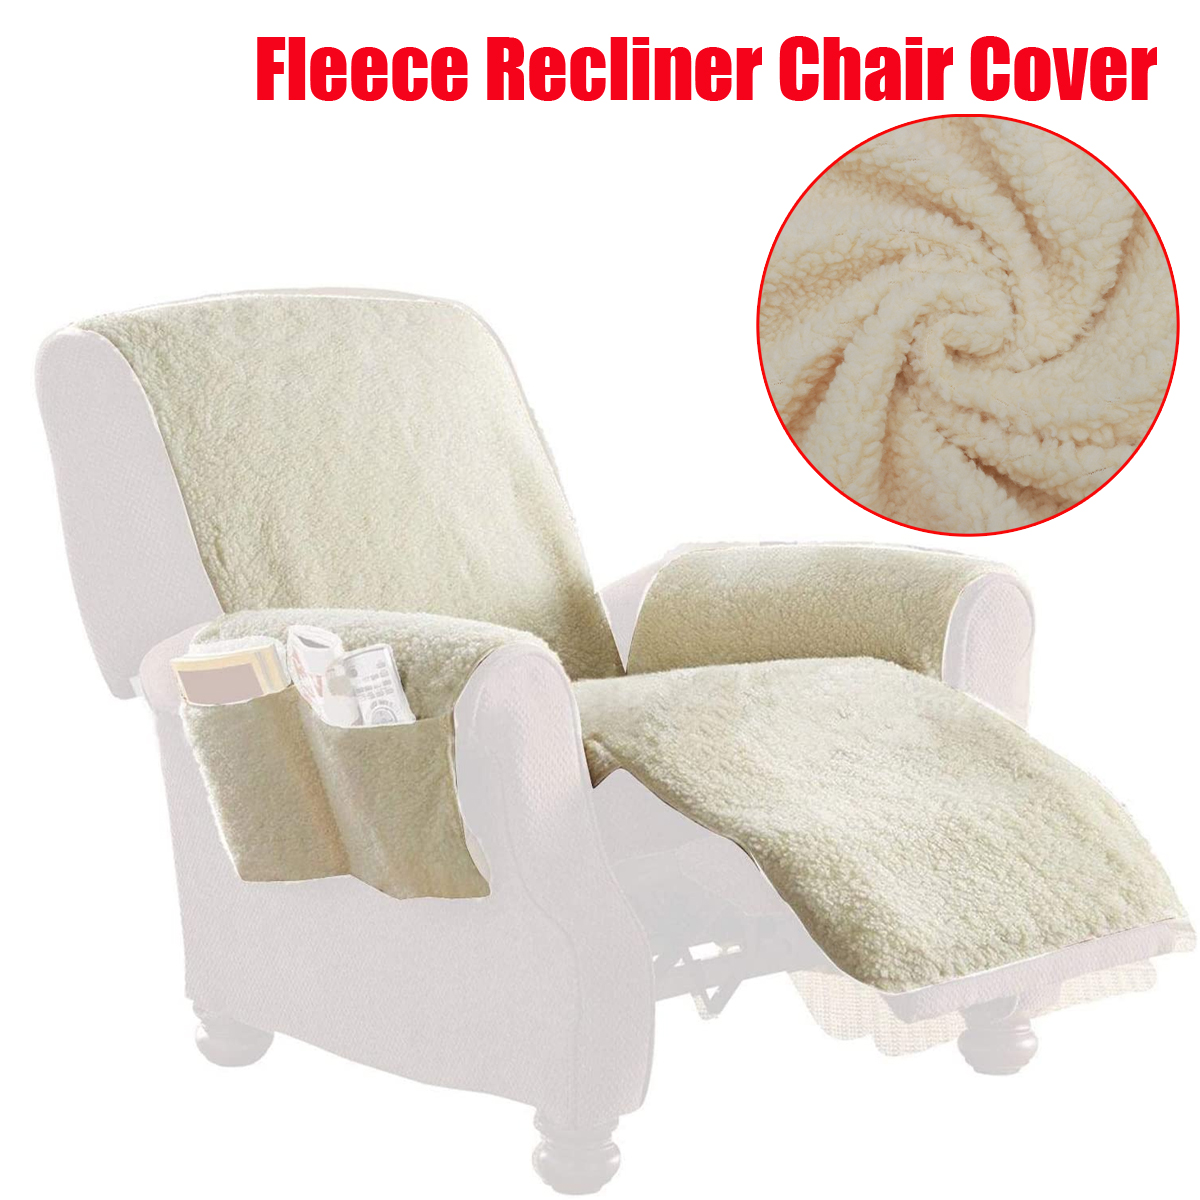 Chair-Seat-Sofa-Couch-Fleece-Recliner-Cover-Slipcover-Pets-Mat-Furniture-1827423-3